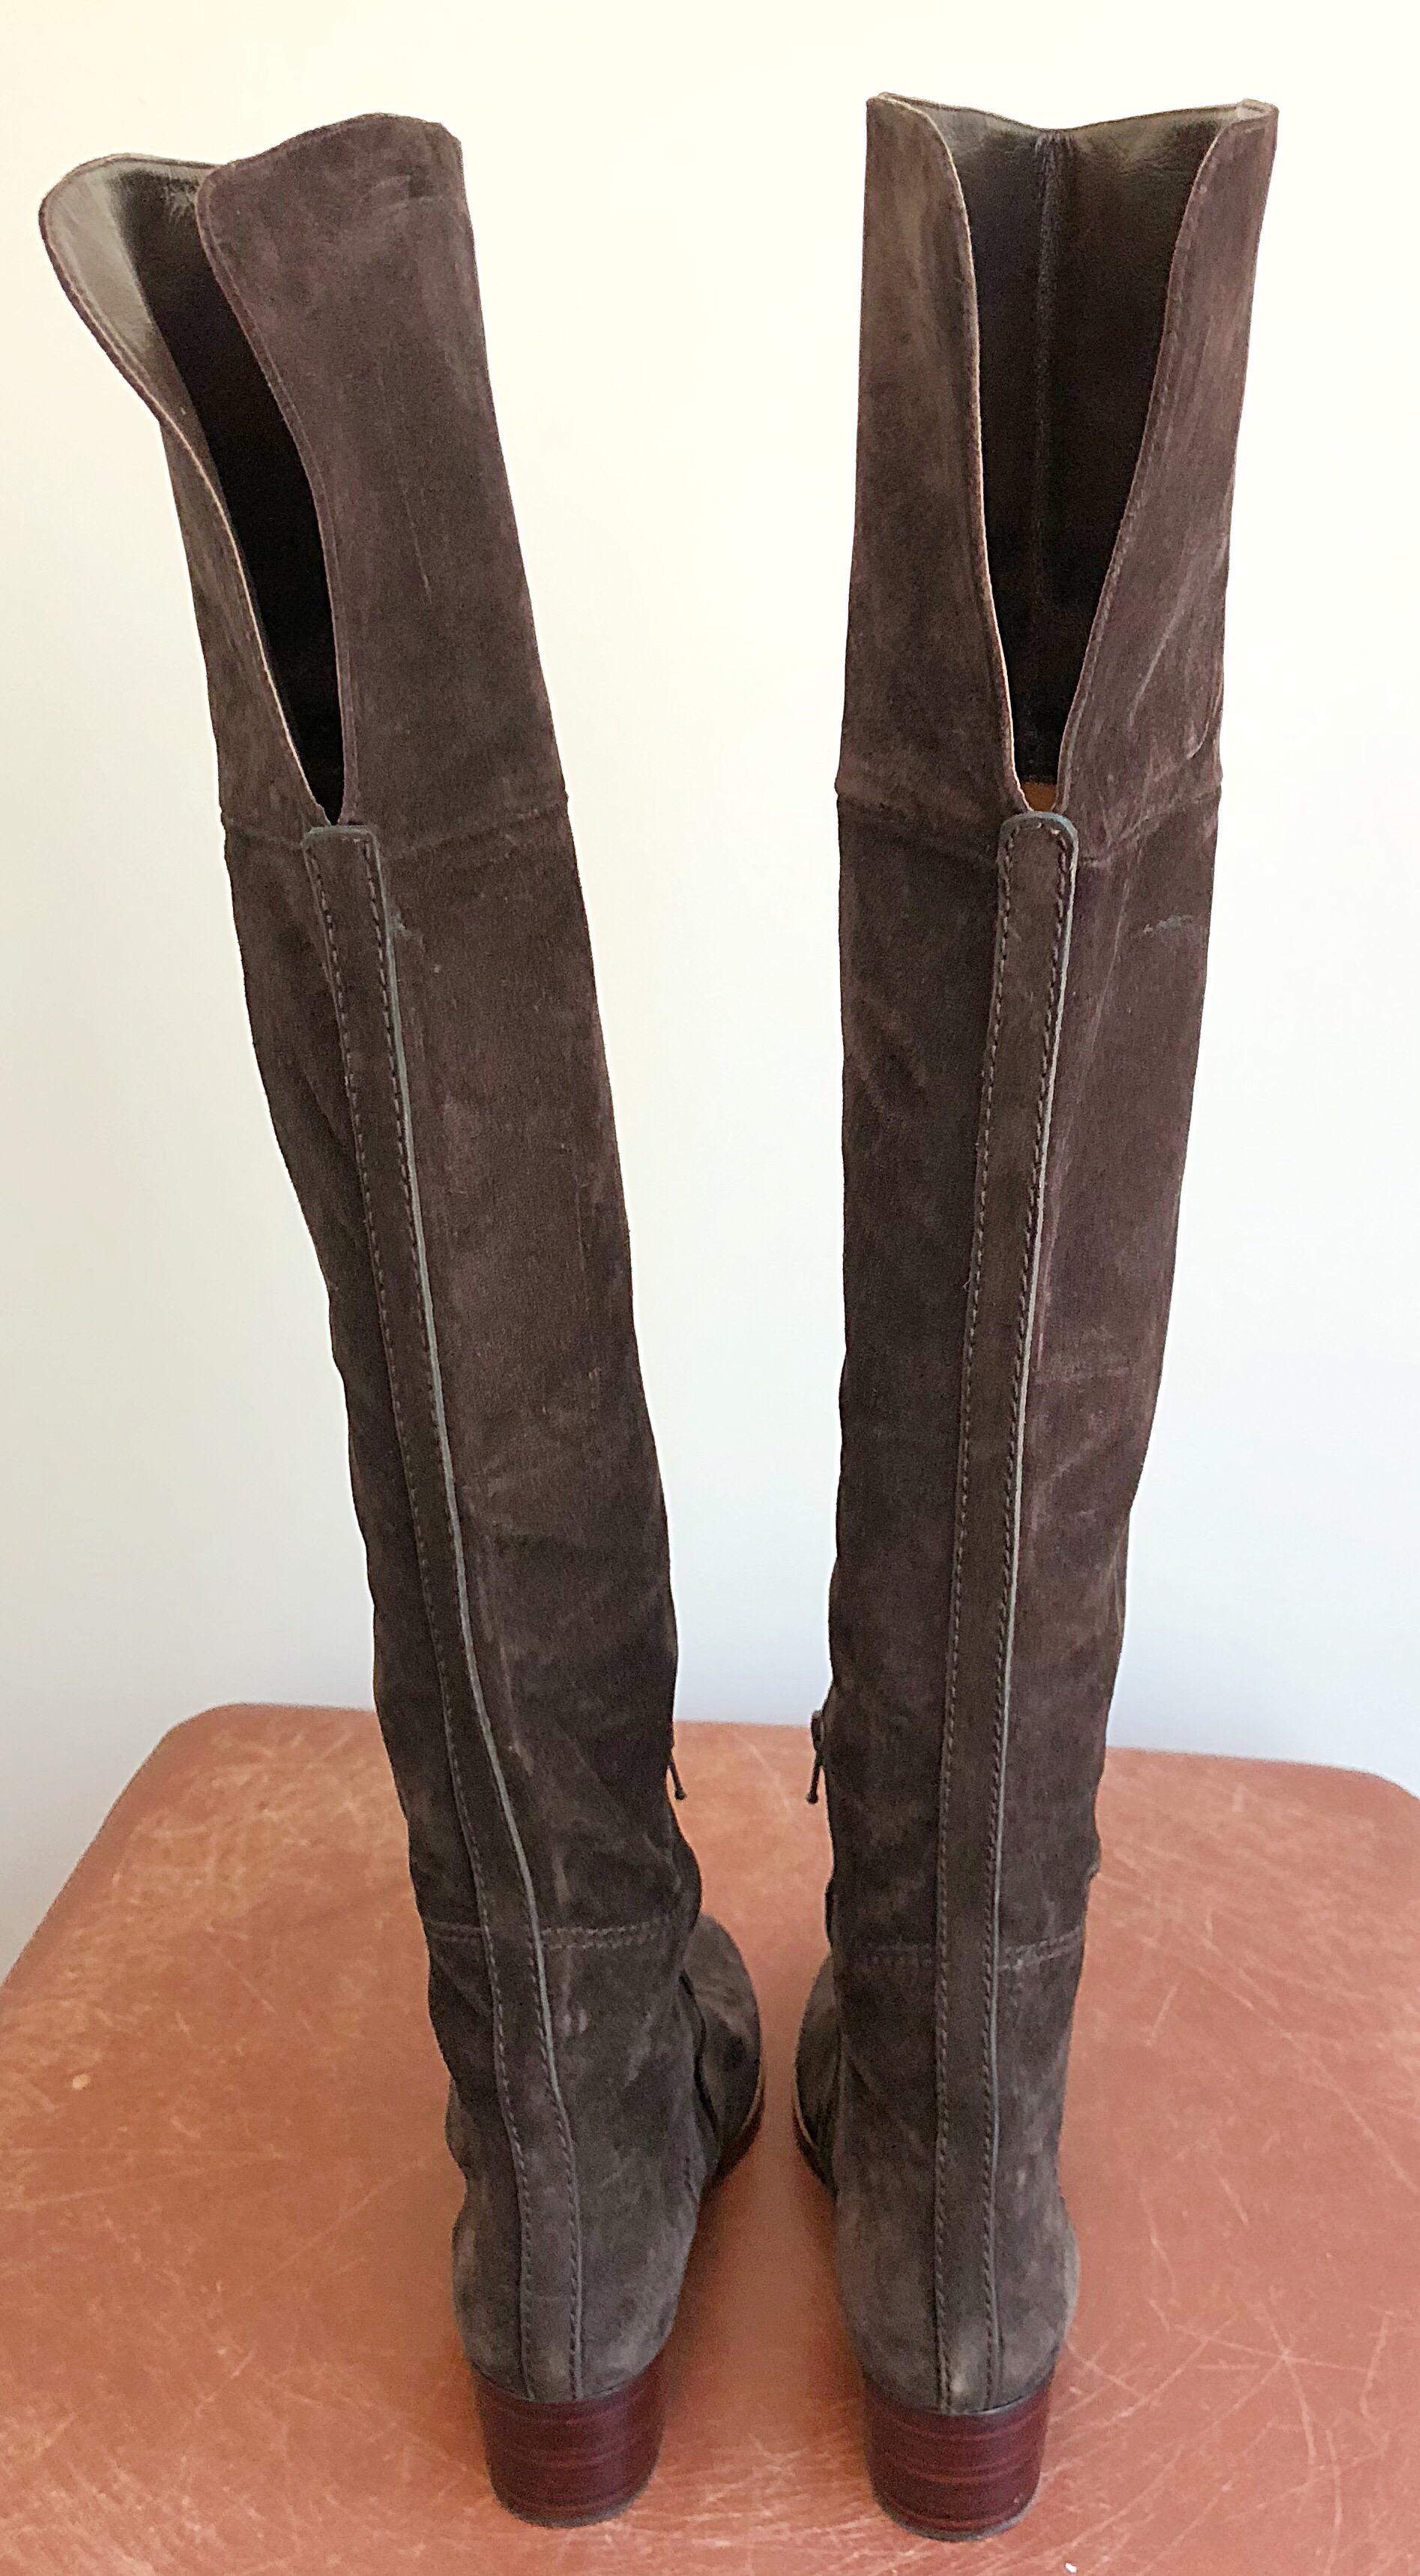 New Chloe Size 37 / 7 Brown Suede Leather Over The Knee Riding Boots For Sale 1